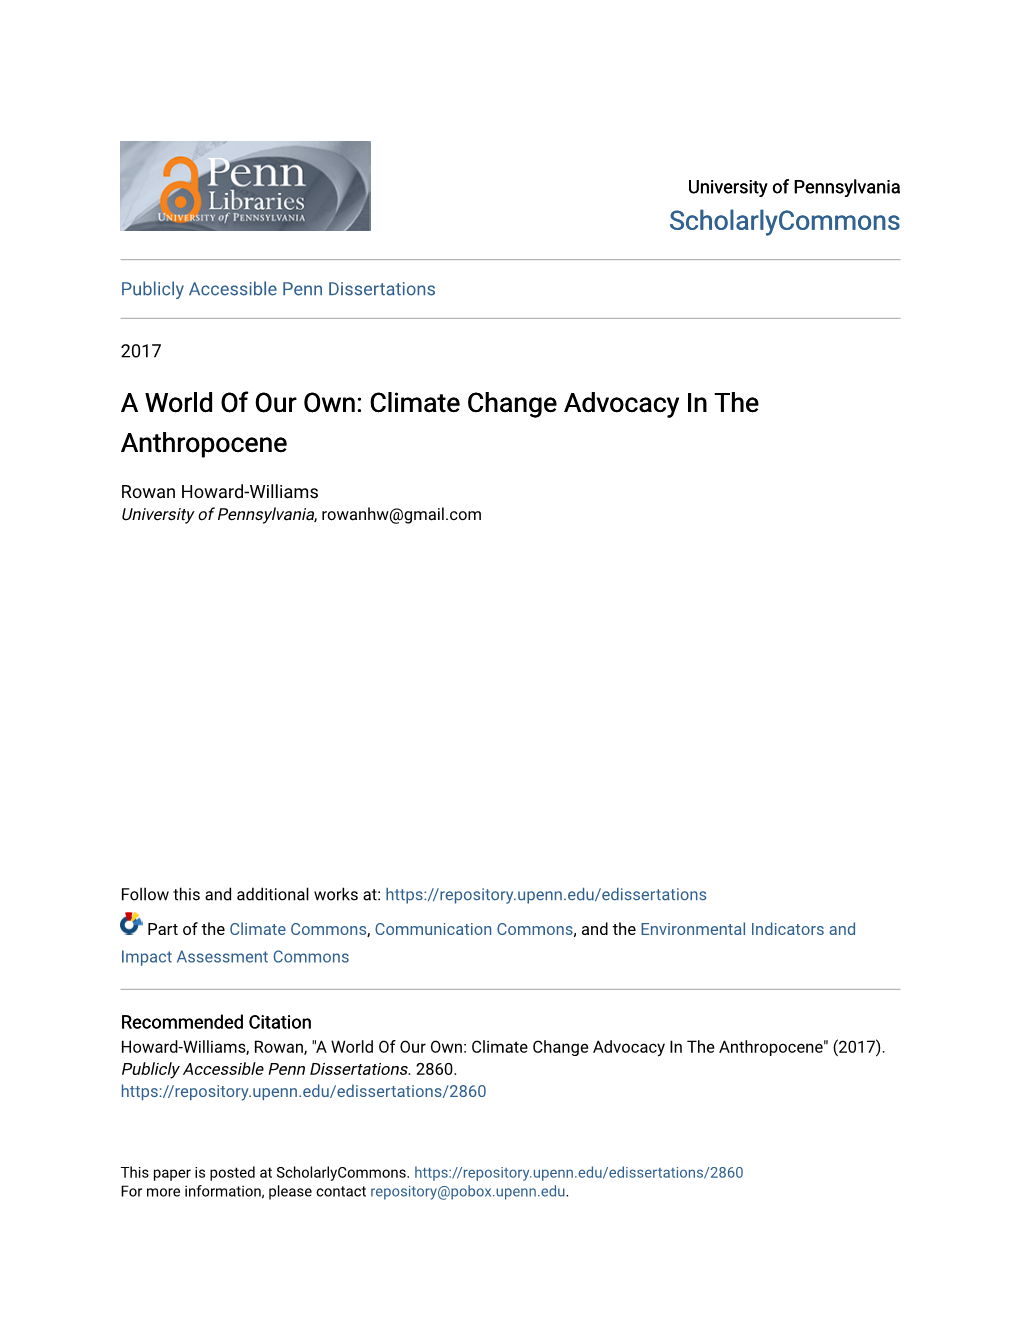 Climate Change Advocacy in the Anthropocene